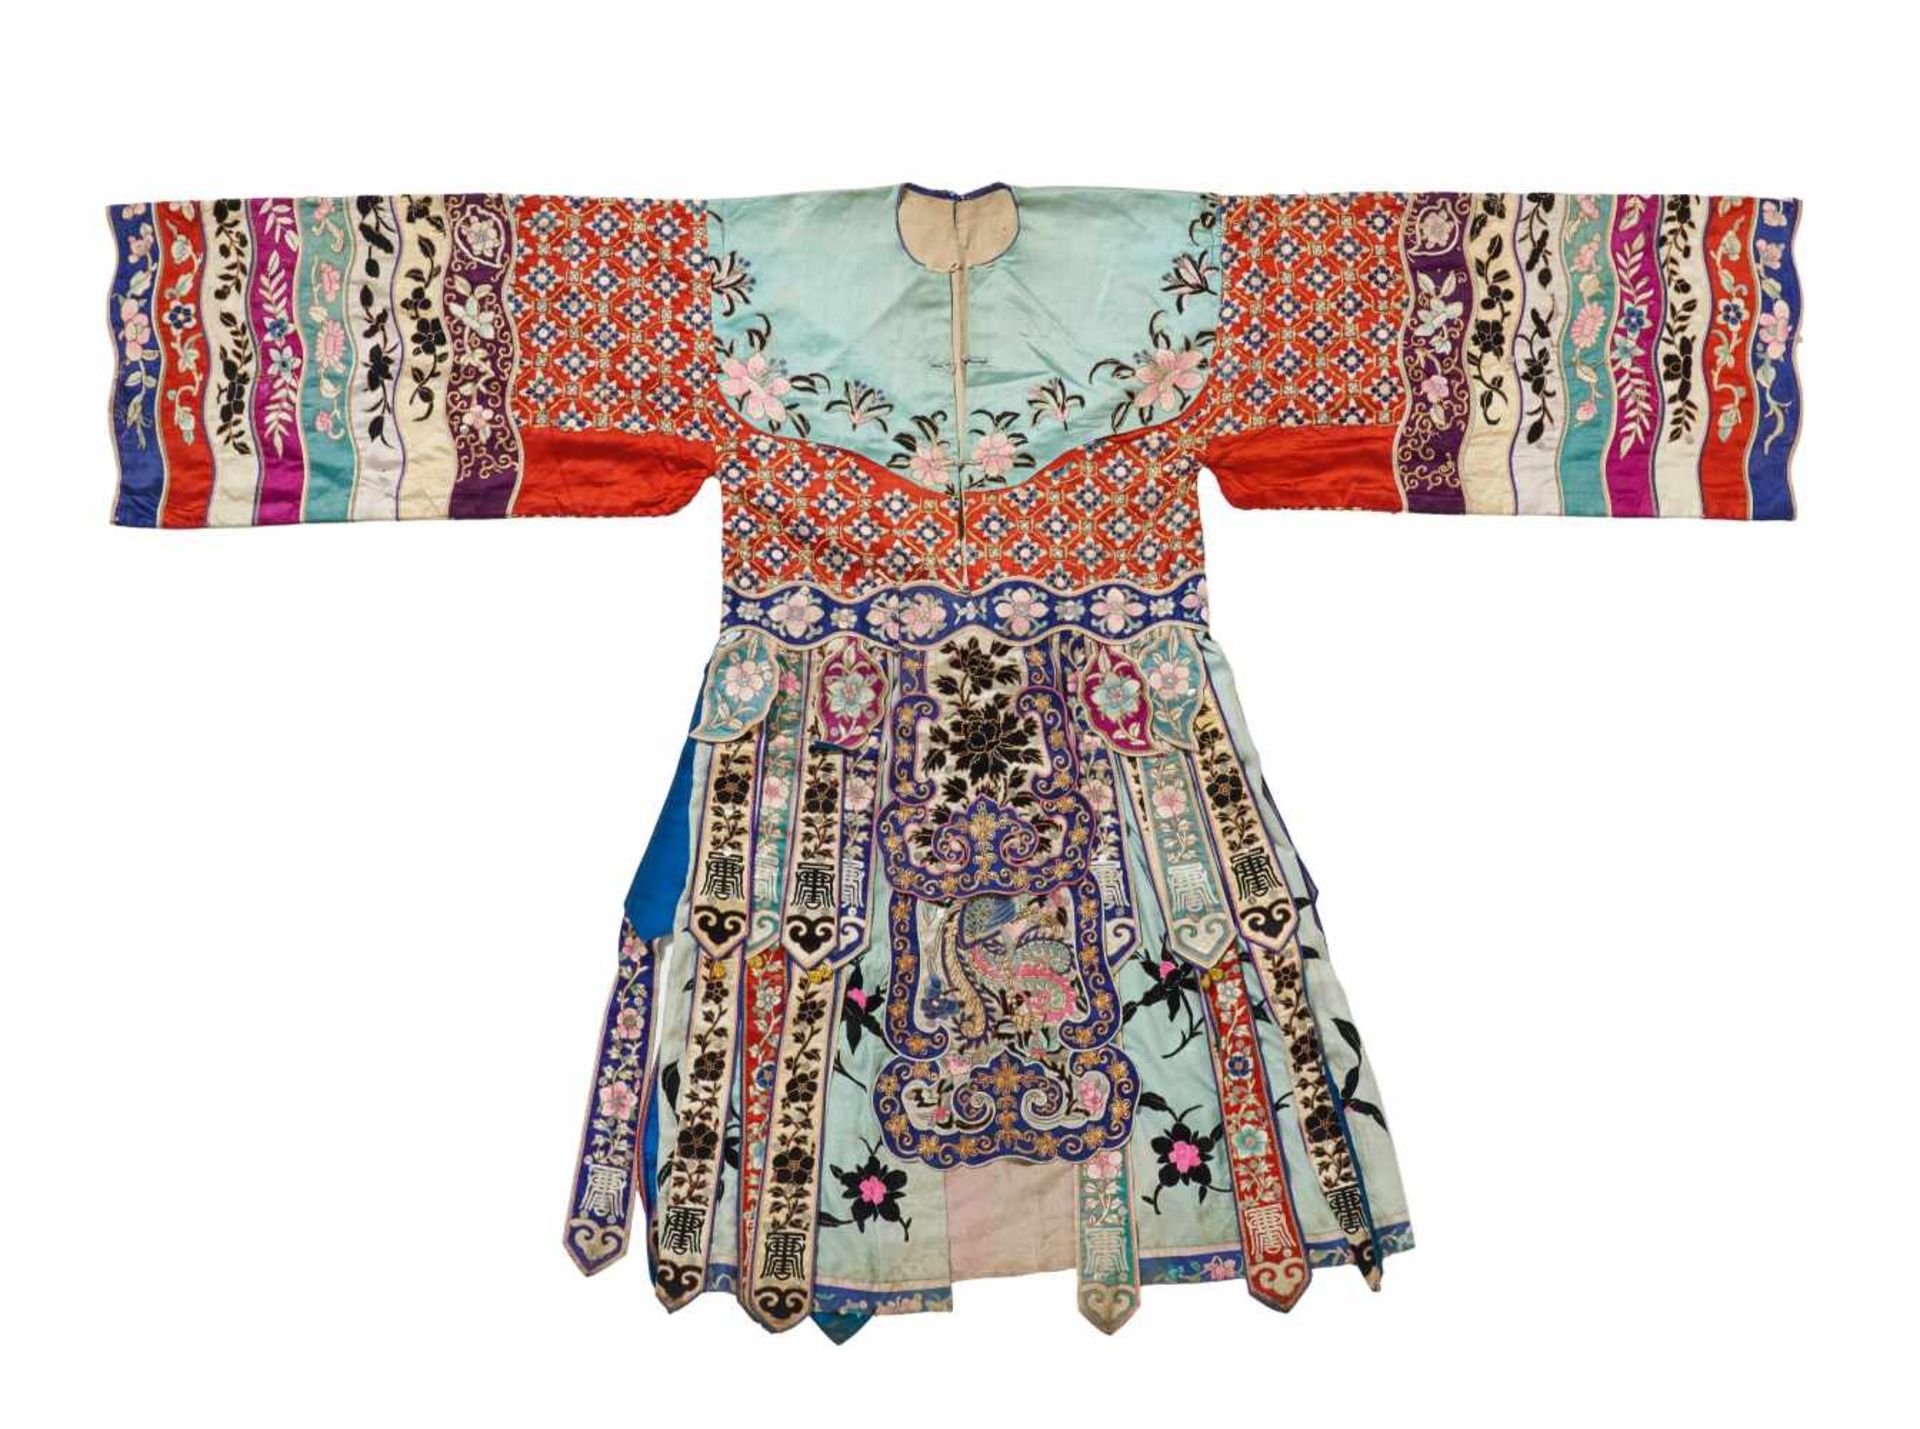 OPERA ROBE FOR THE ROLE OF A PRINCESS. China. Qing dynasty (1644-1911). Ca. 1900. Silk damask,